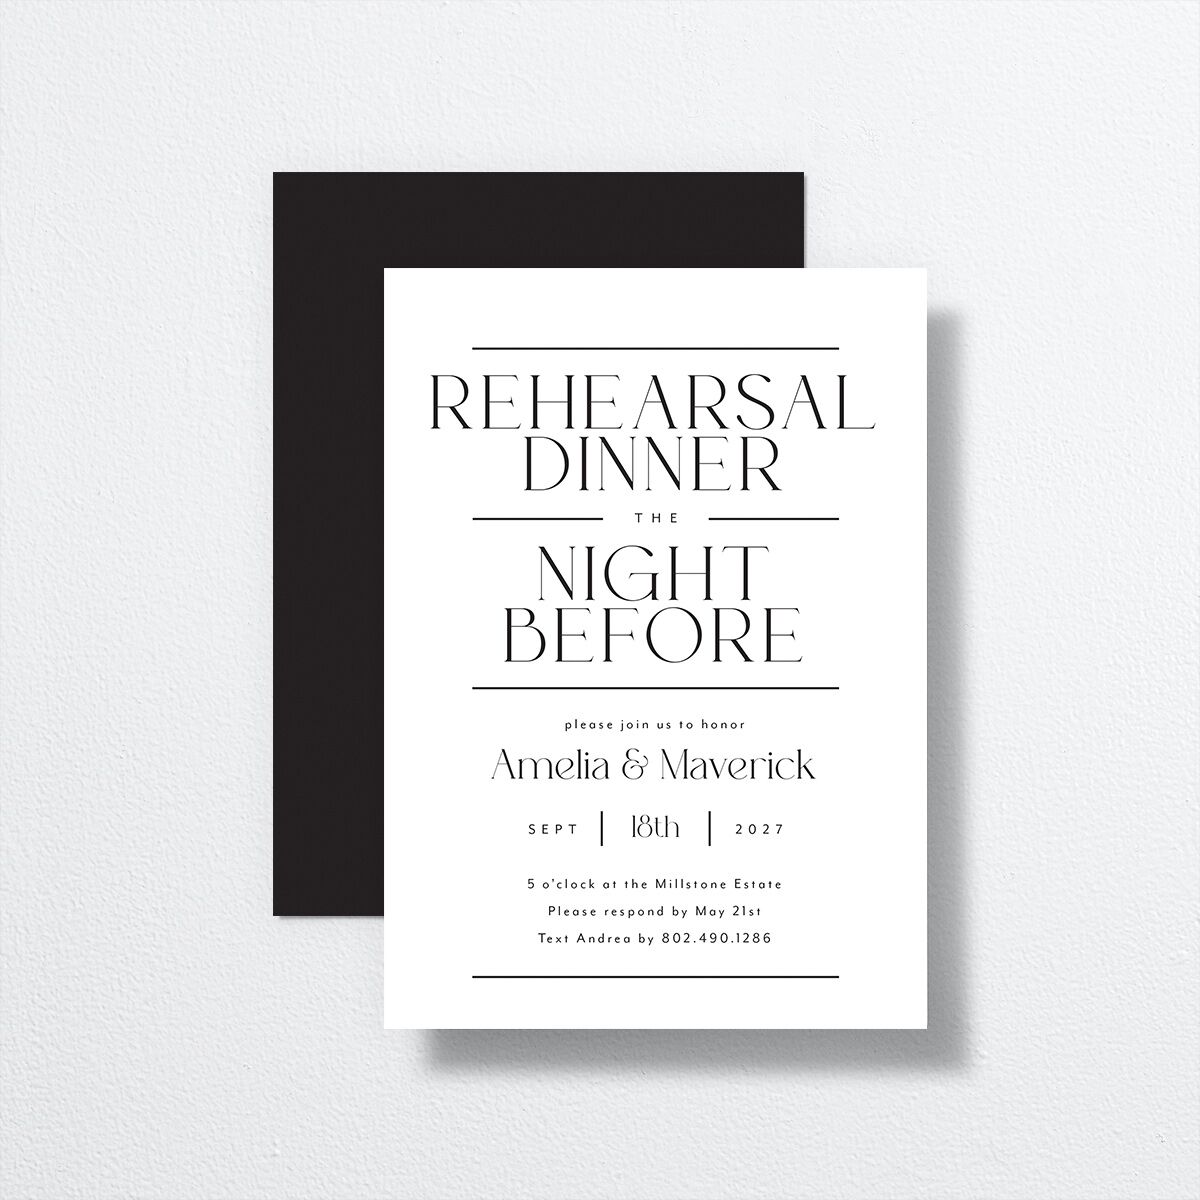 Estate Rehearsal Dinner Invitations front-and-back